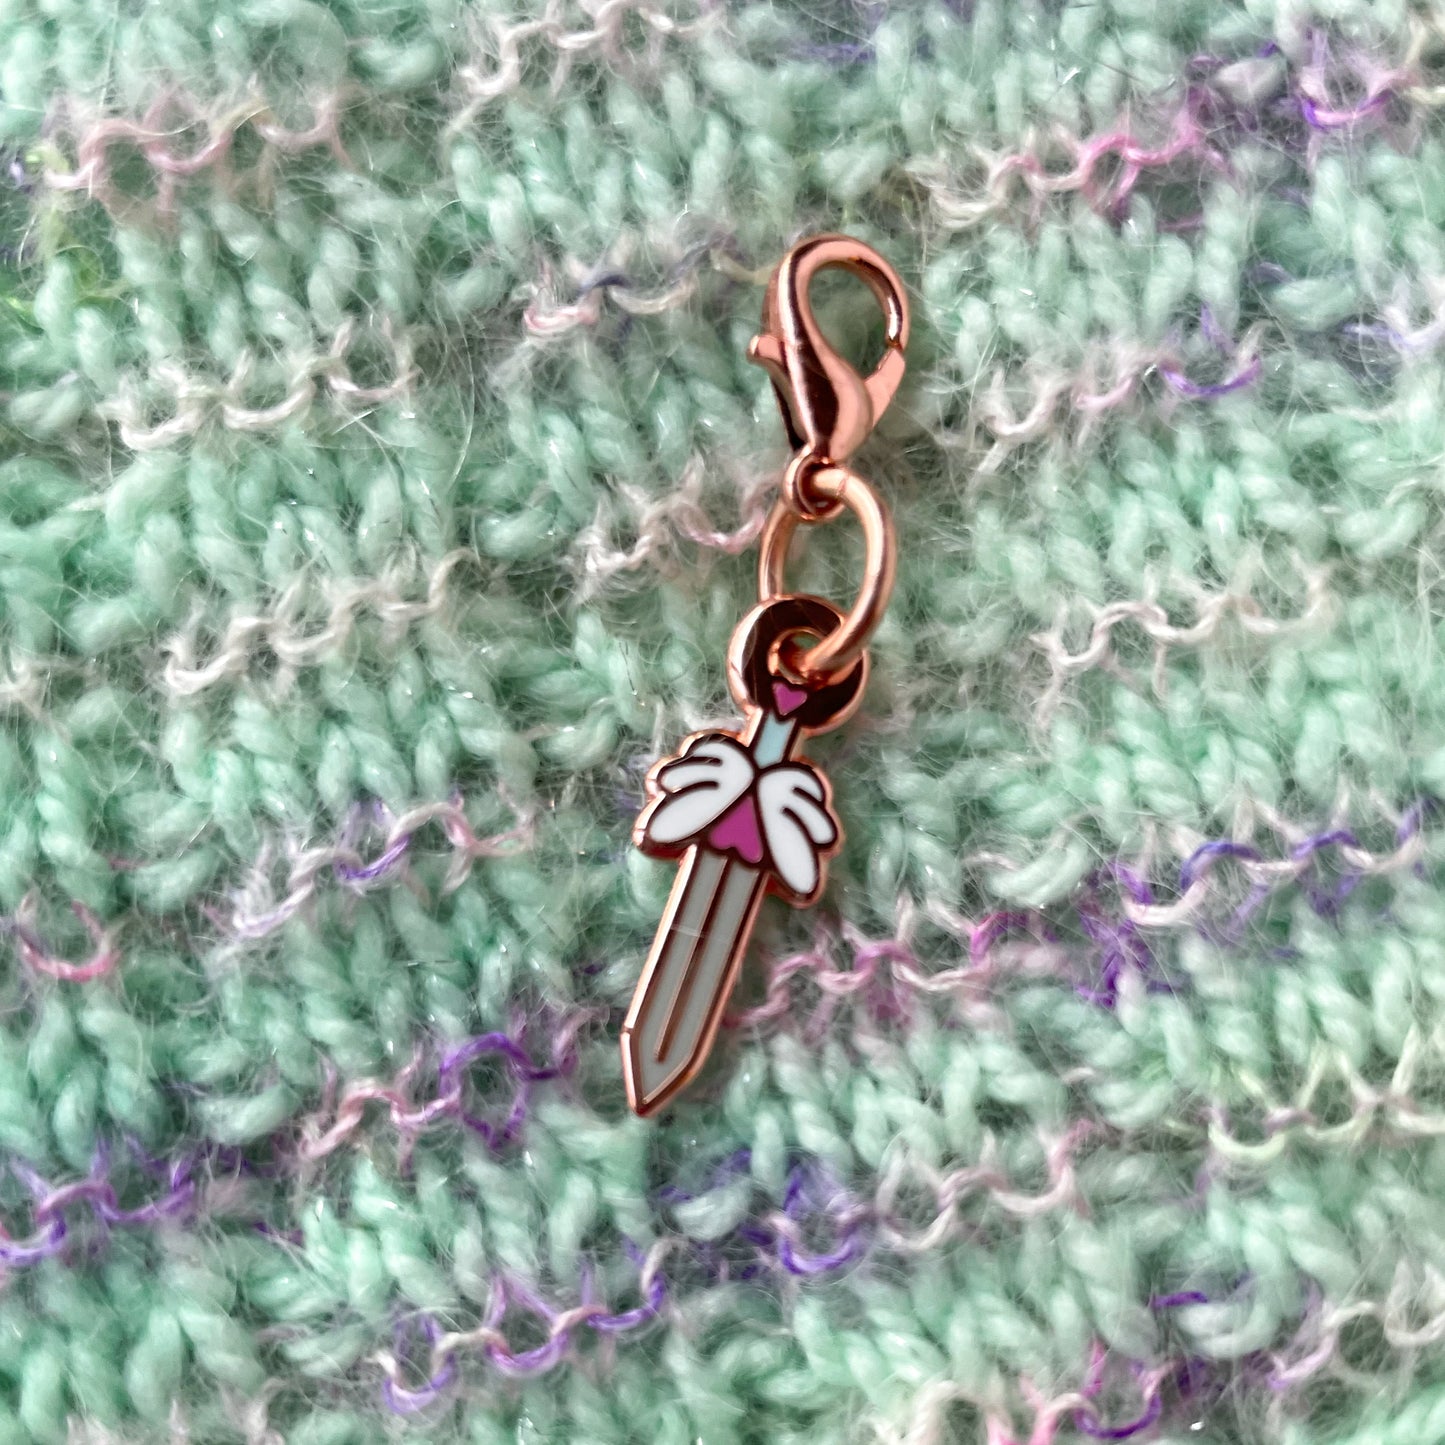 A sword charm on a background of handknit fabric. The fabric is mint and sparkly with stripes of fuzzy pink.